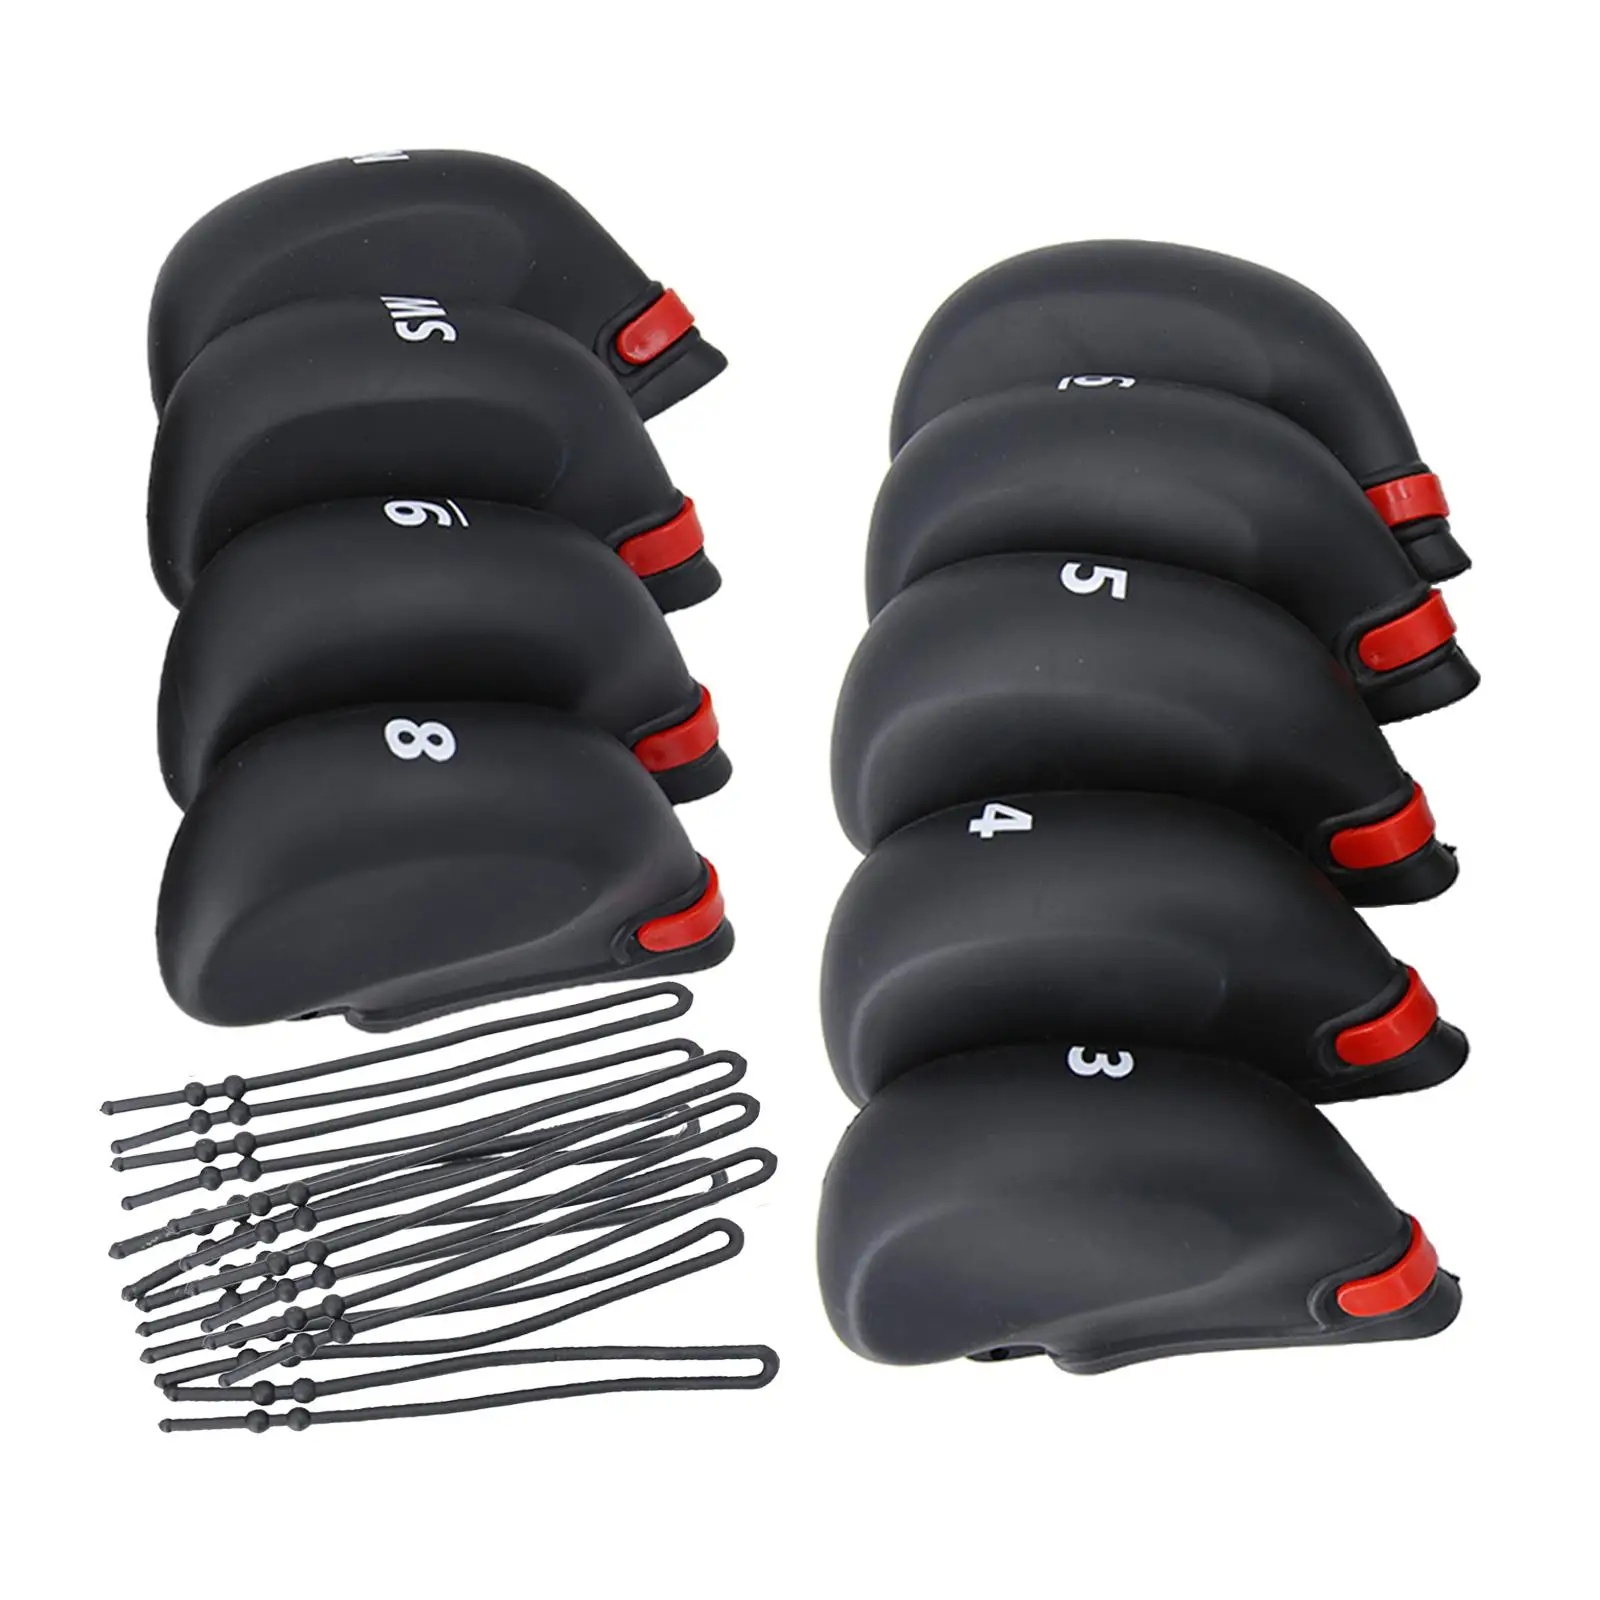 Golf Club Iron Covers , Deluxe Head Cover Set, covers for head for Irons Fit Main Iron Clubs